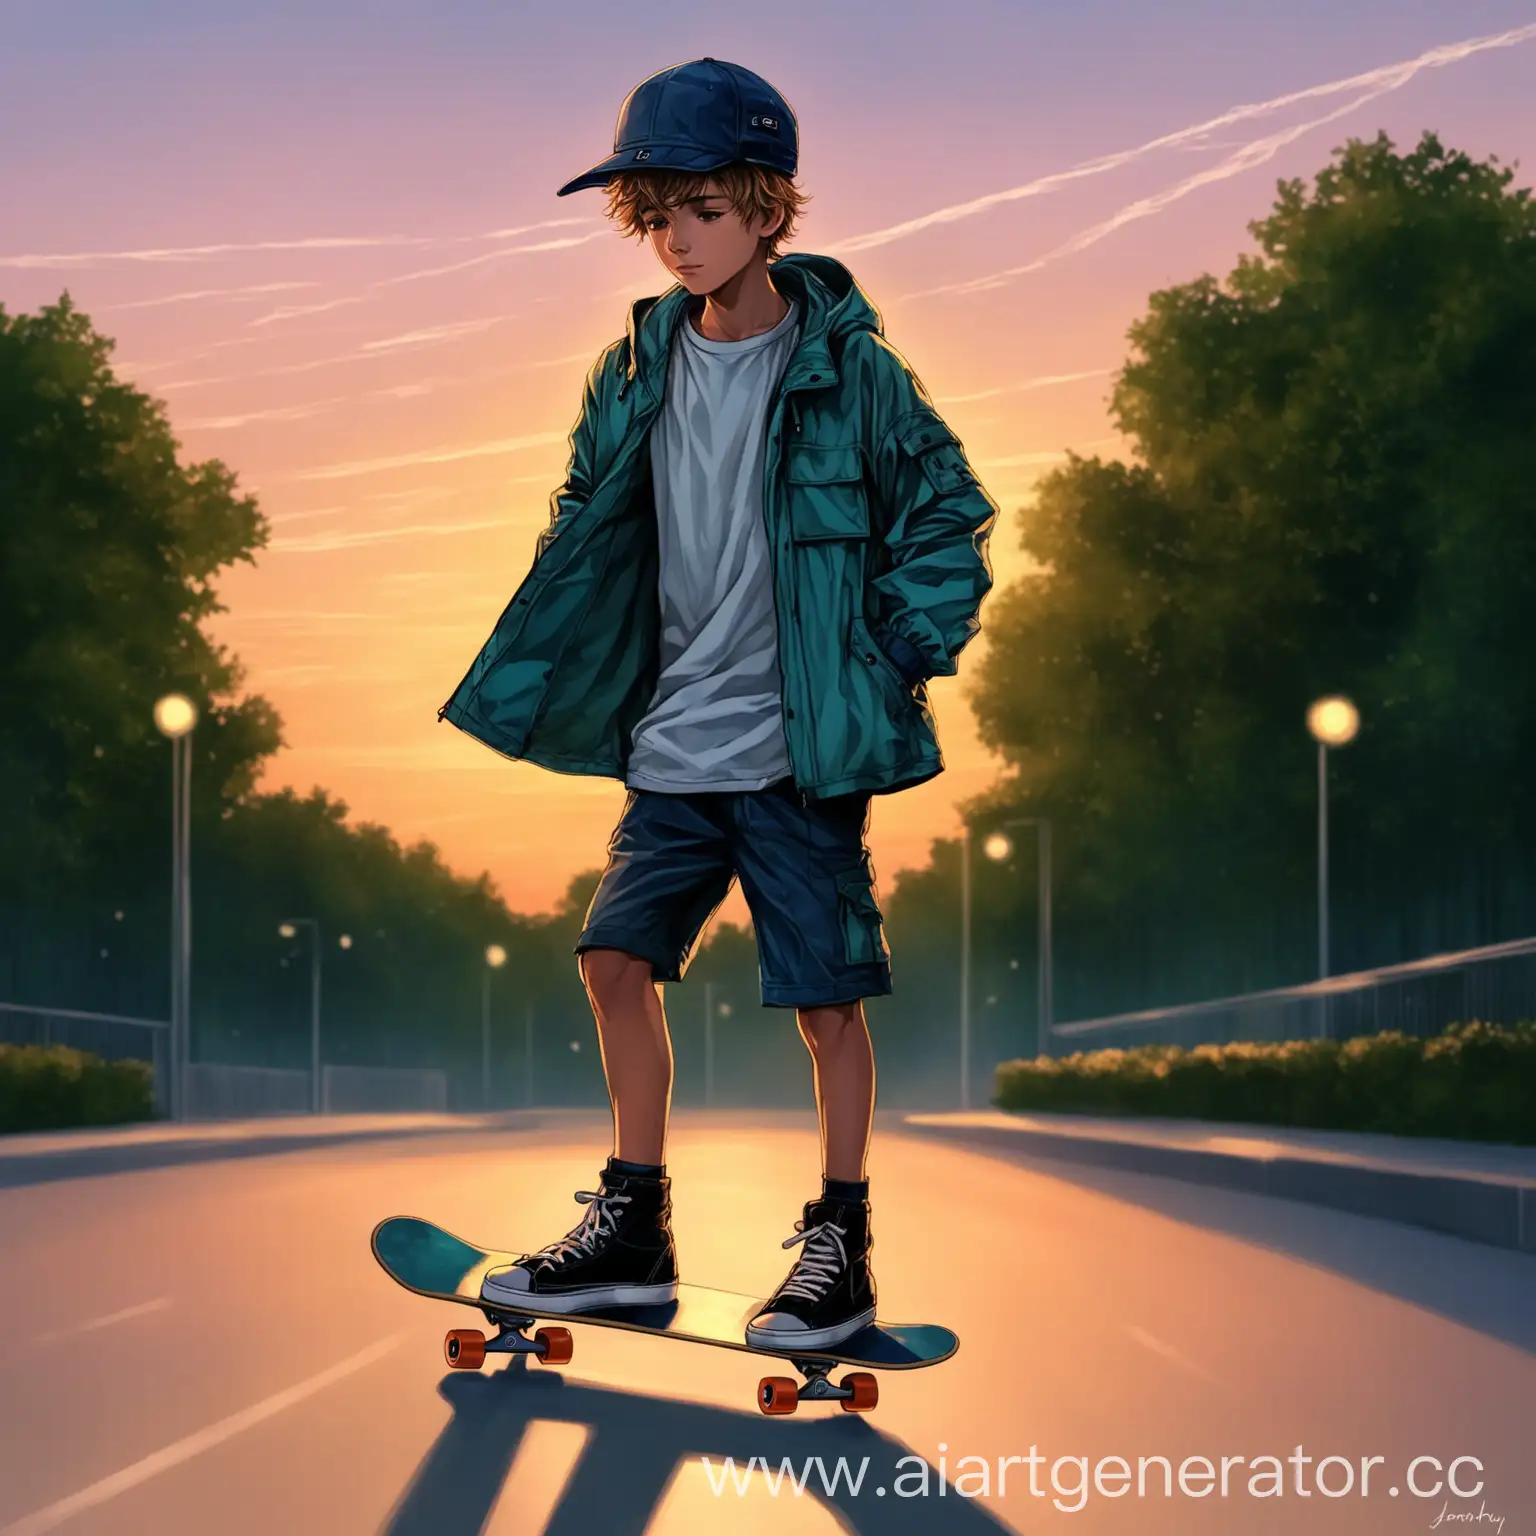 Skater-Boy-in-Summer-Wind-with-Torn-Cap-and-Anorak-Jacket